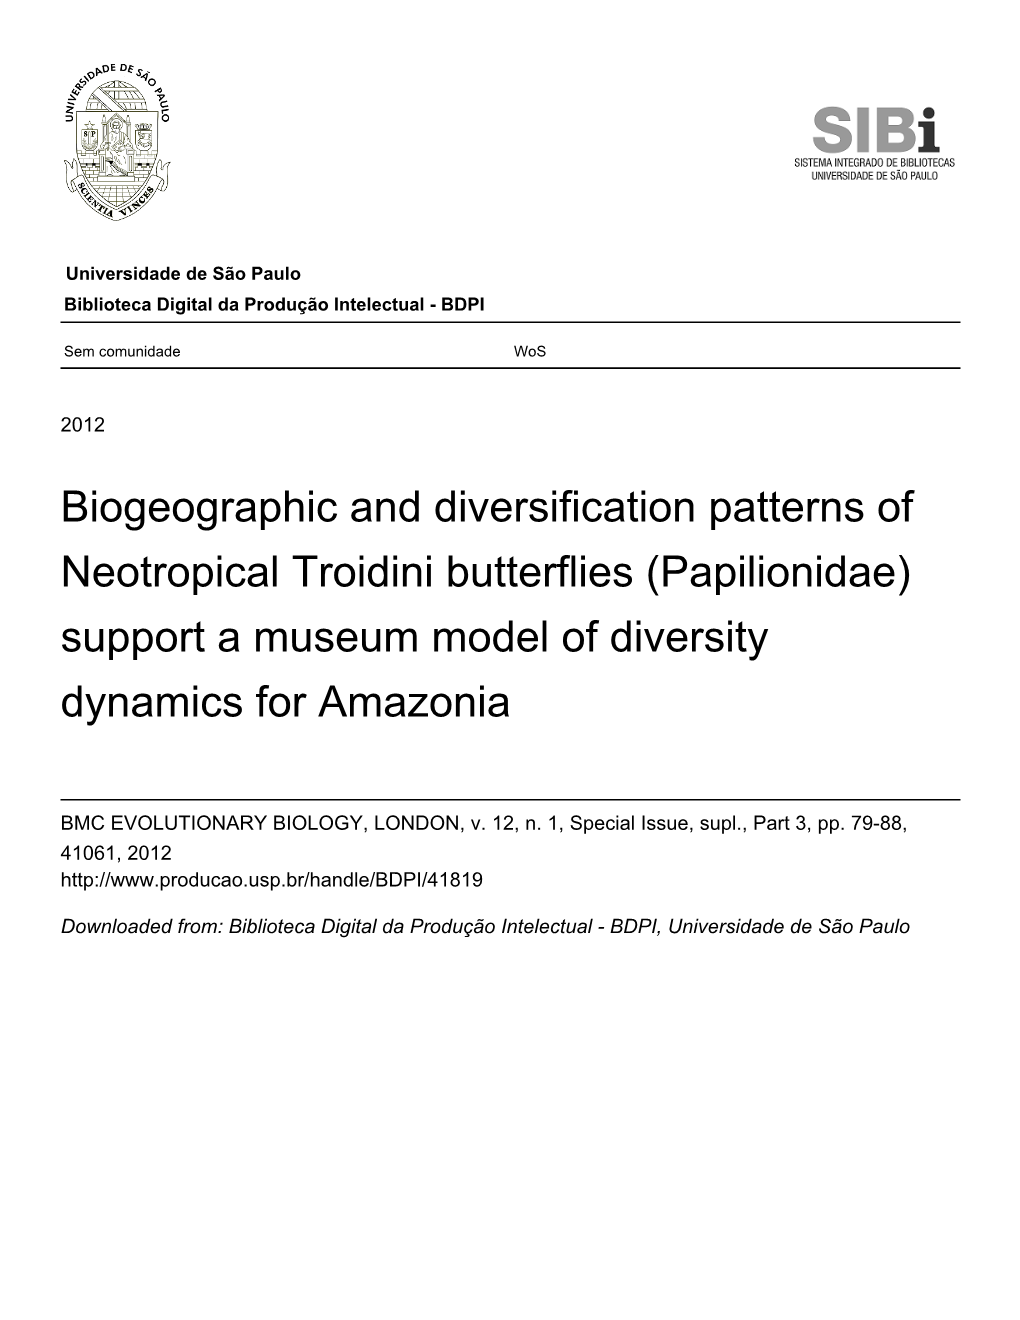 Biogeographic and Diversification Patterns of Neotropical Troidini Butterflies (Papilionidae) Support a Museum Model of Diversity Dynamics for Amazonia